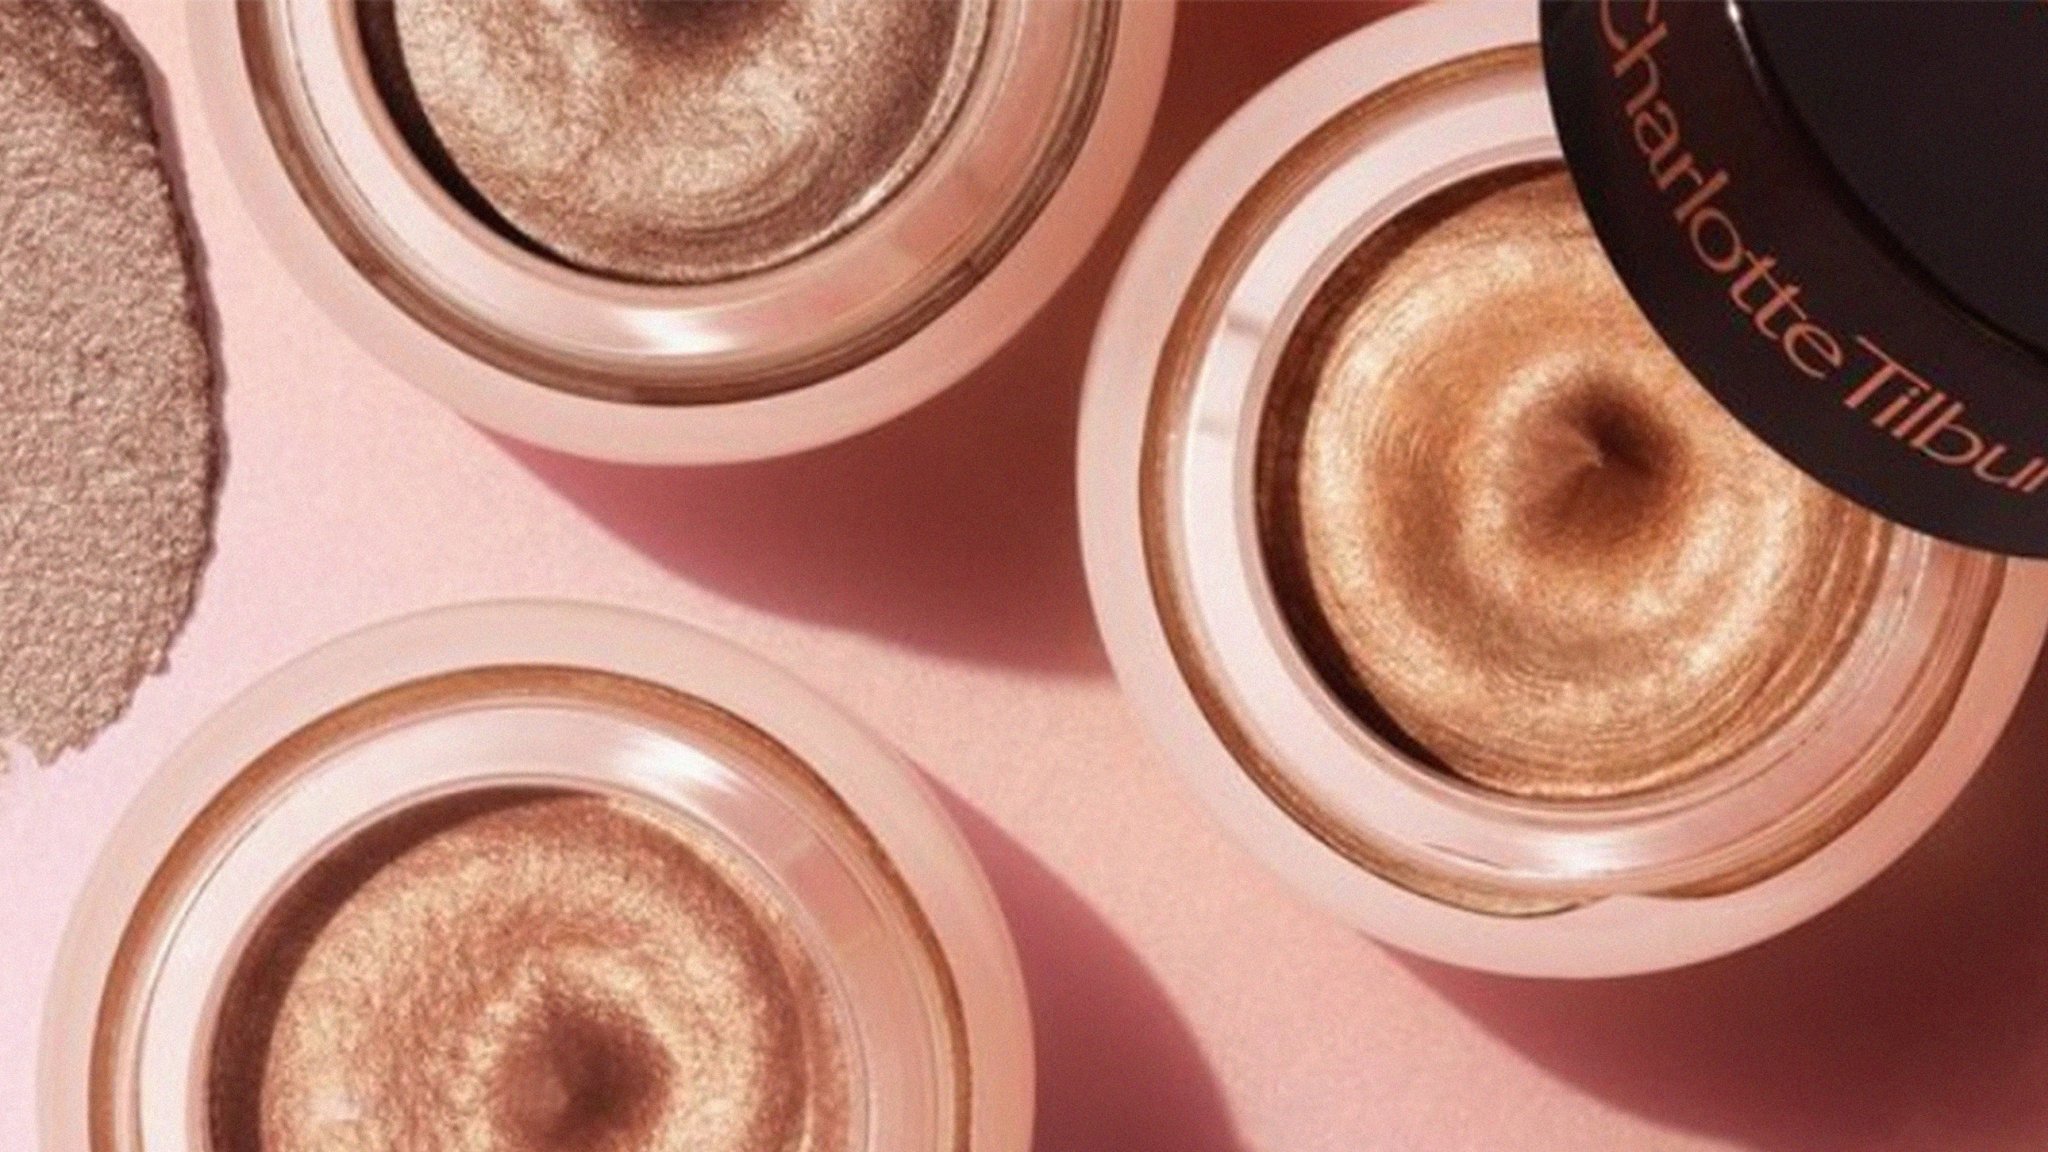 The best Charlotte Tilbury Cyber Monday deals with savings up to £75 and Mystery Boxes